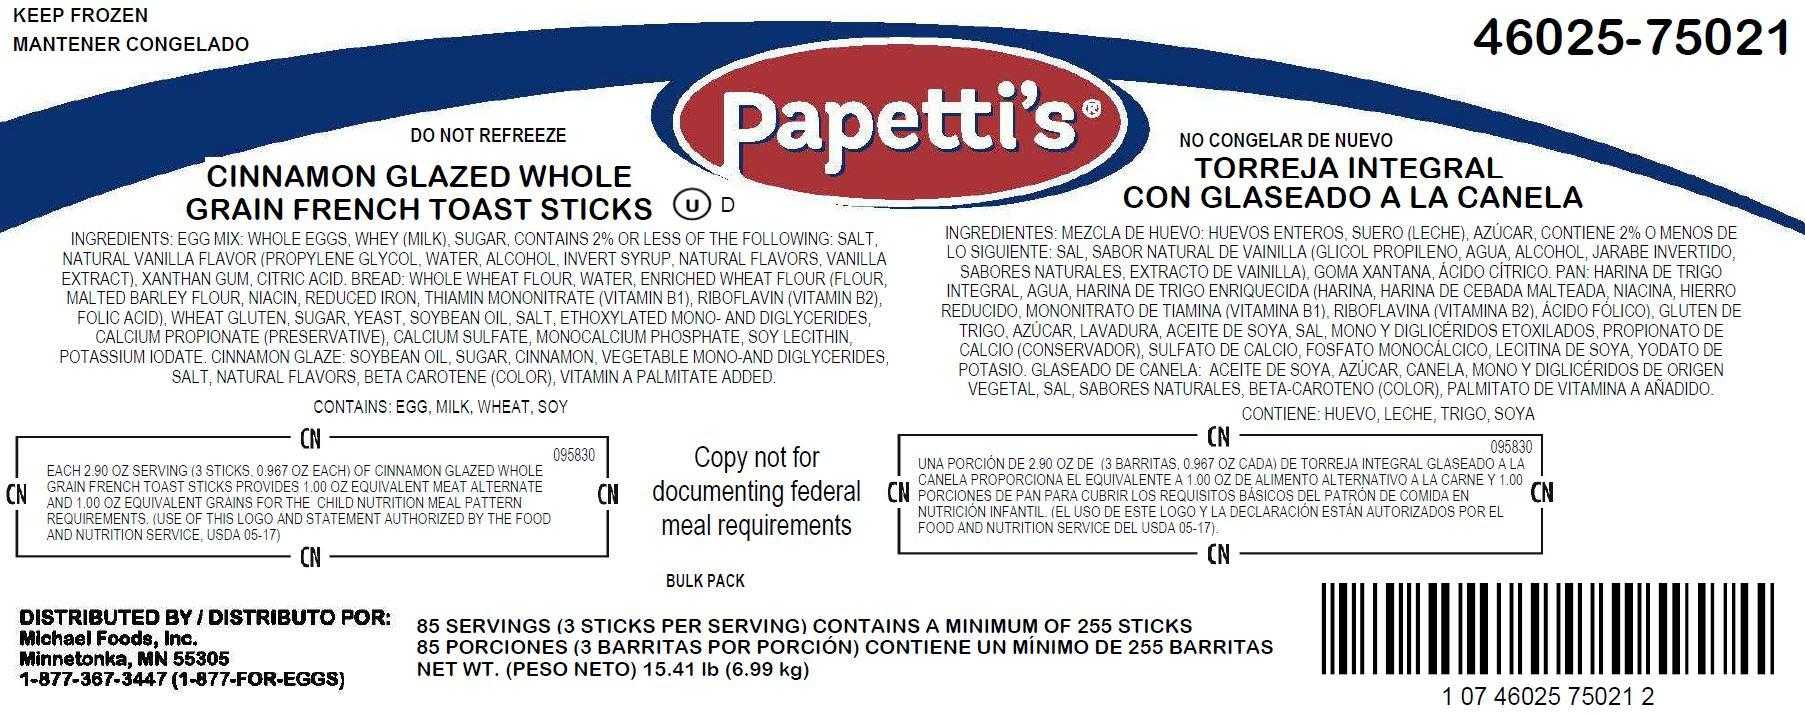 Papetti’s® Fully-Cooked Whole Grain Cinnamon Glaze French Toast Sticks, CN, 85/2.9 oz CN Labeled PDF